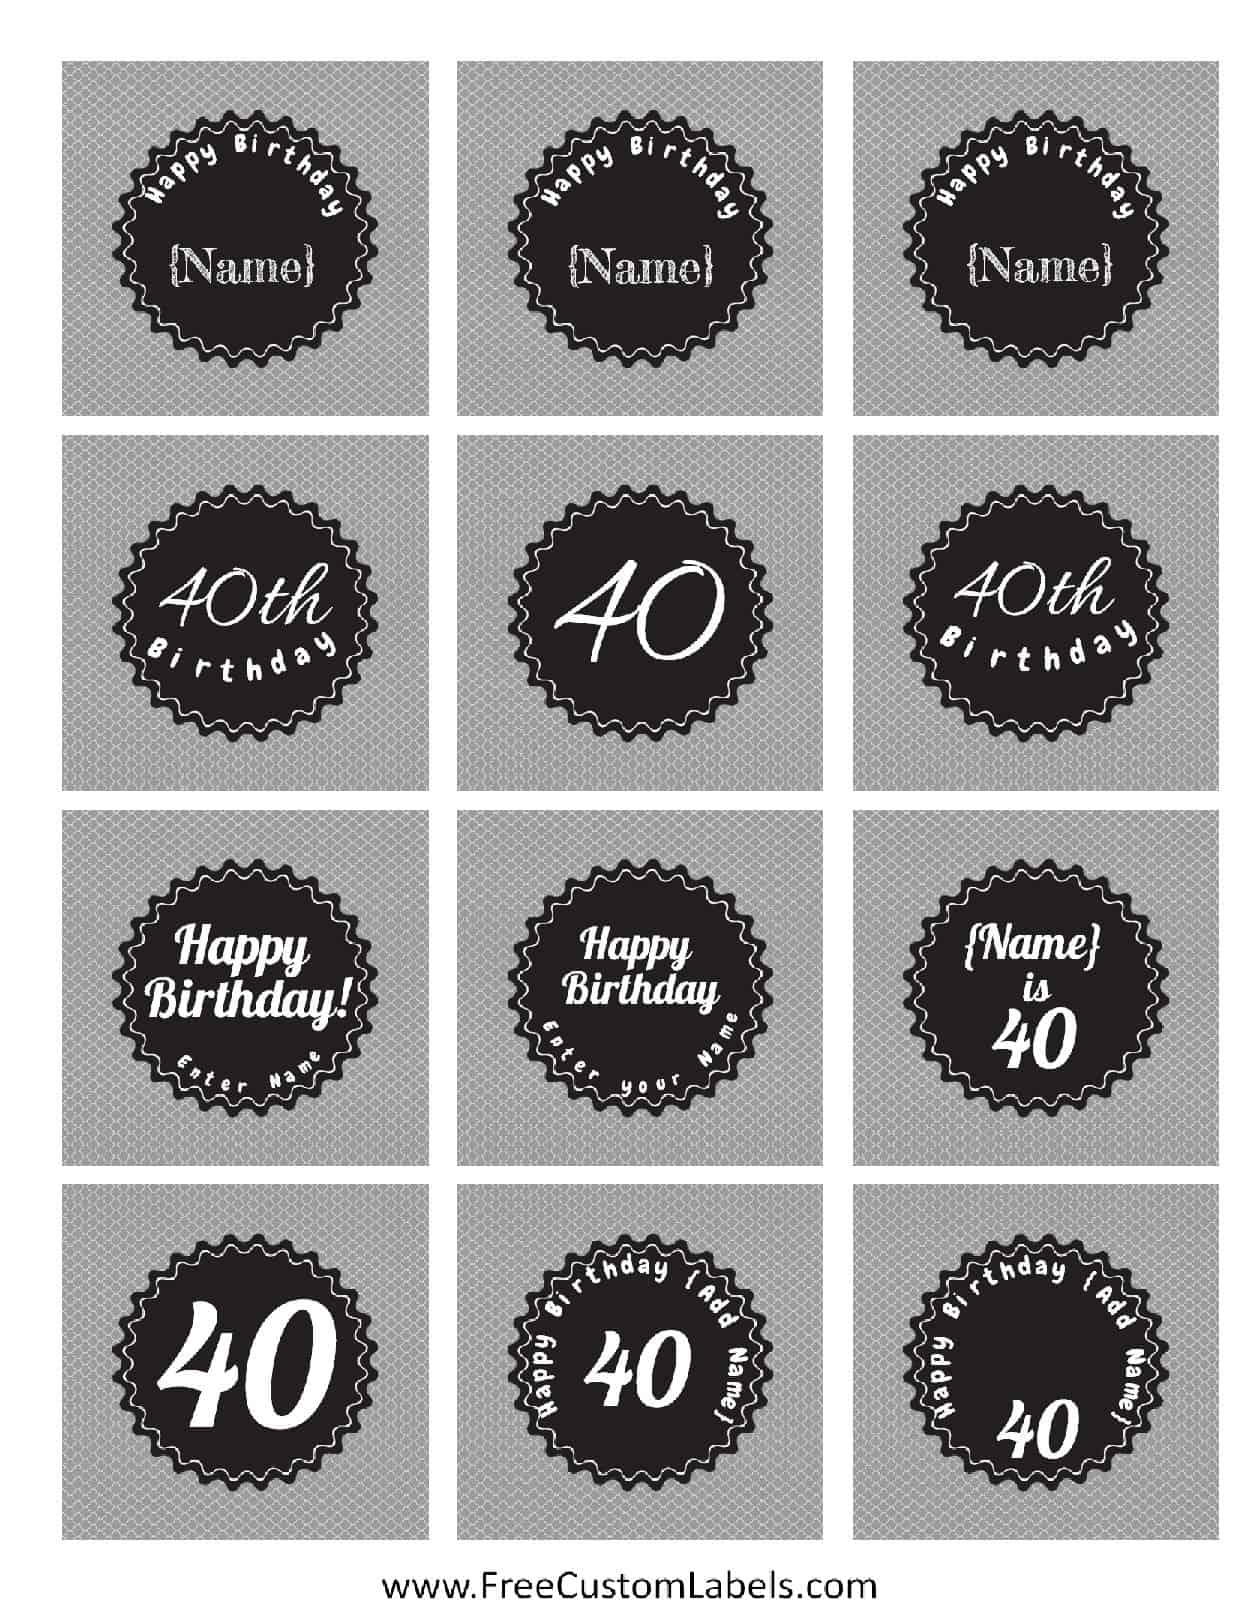 40th-birthday-cupcake-toppers-free-customizable